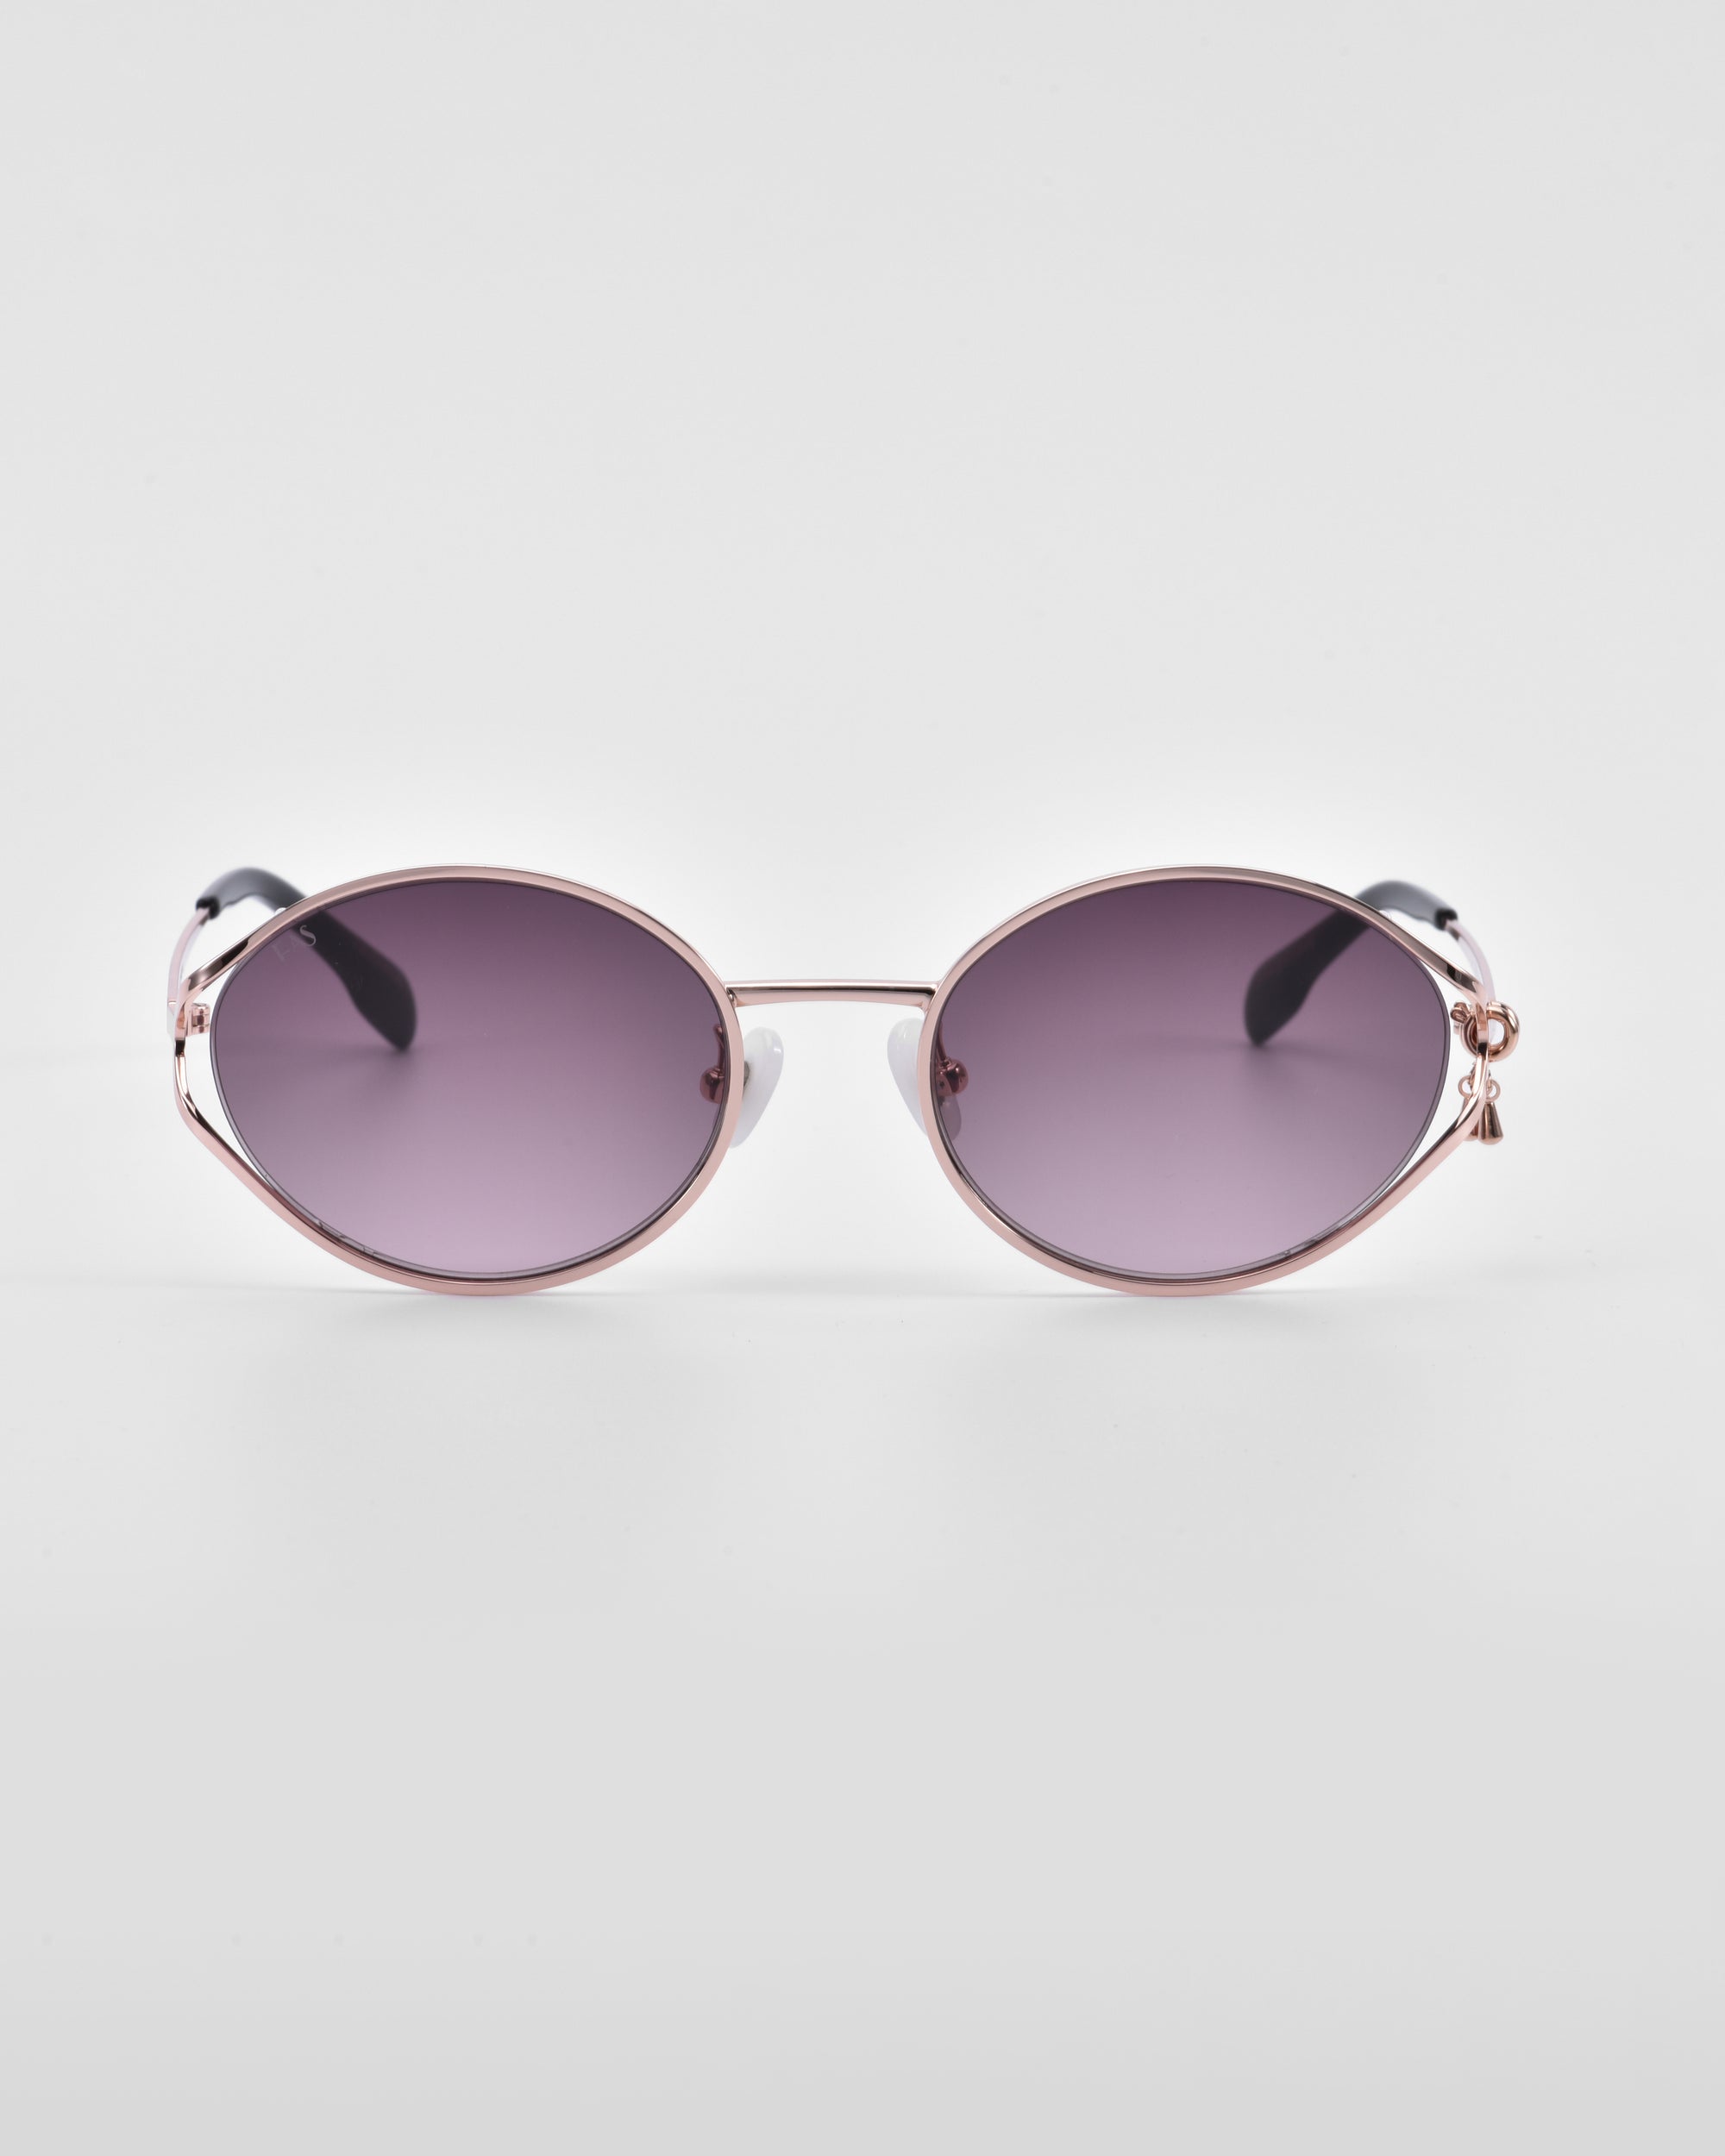 A pair of &#39;Sky&#39; sunglasses from For Art&#39;s Sake® with dark lenses and thin metallic frames. The arms are also metallic with black tips, and the nose pads are crafted from natural jade-stone. The background is plain white.